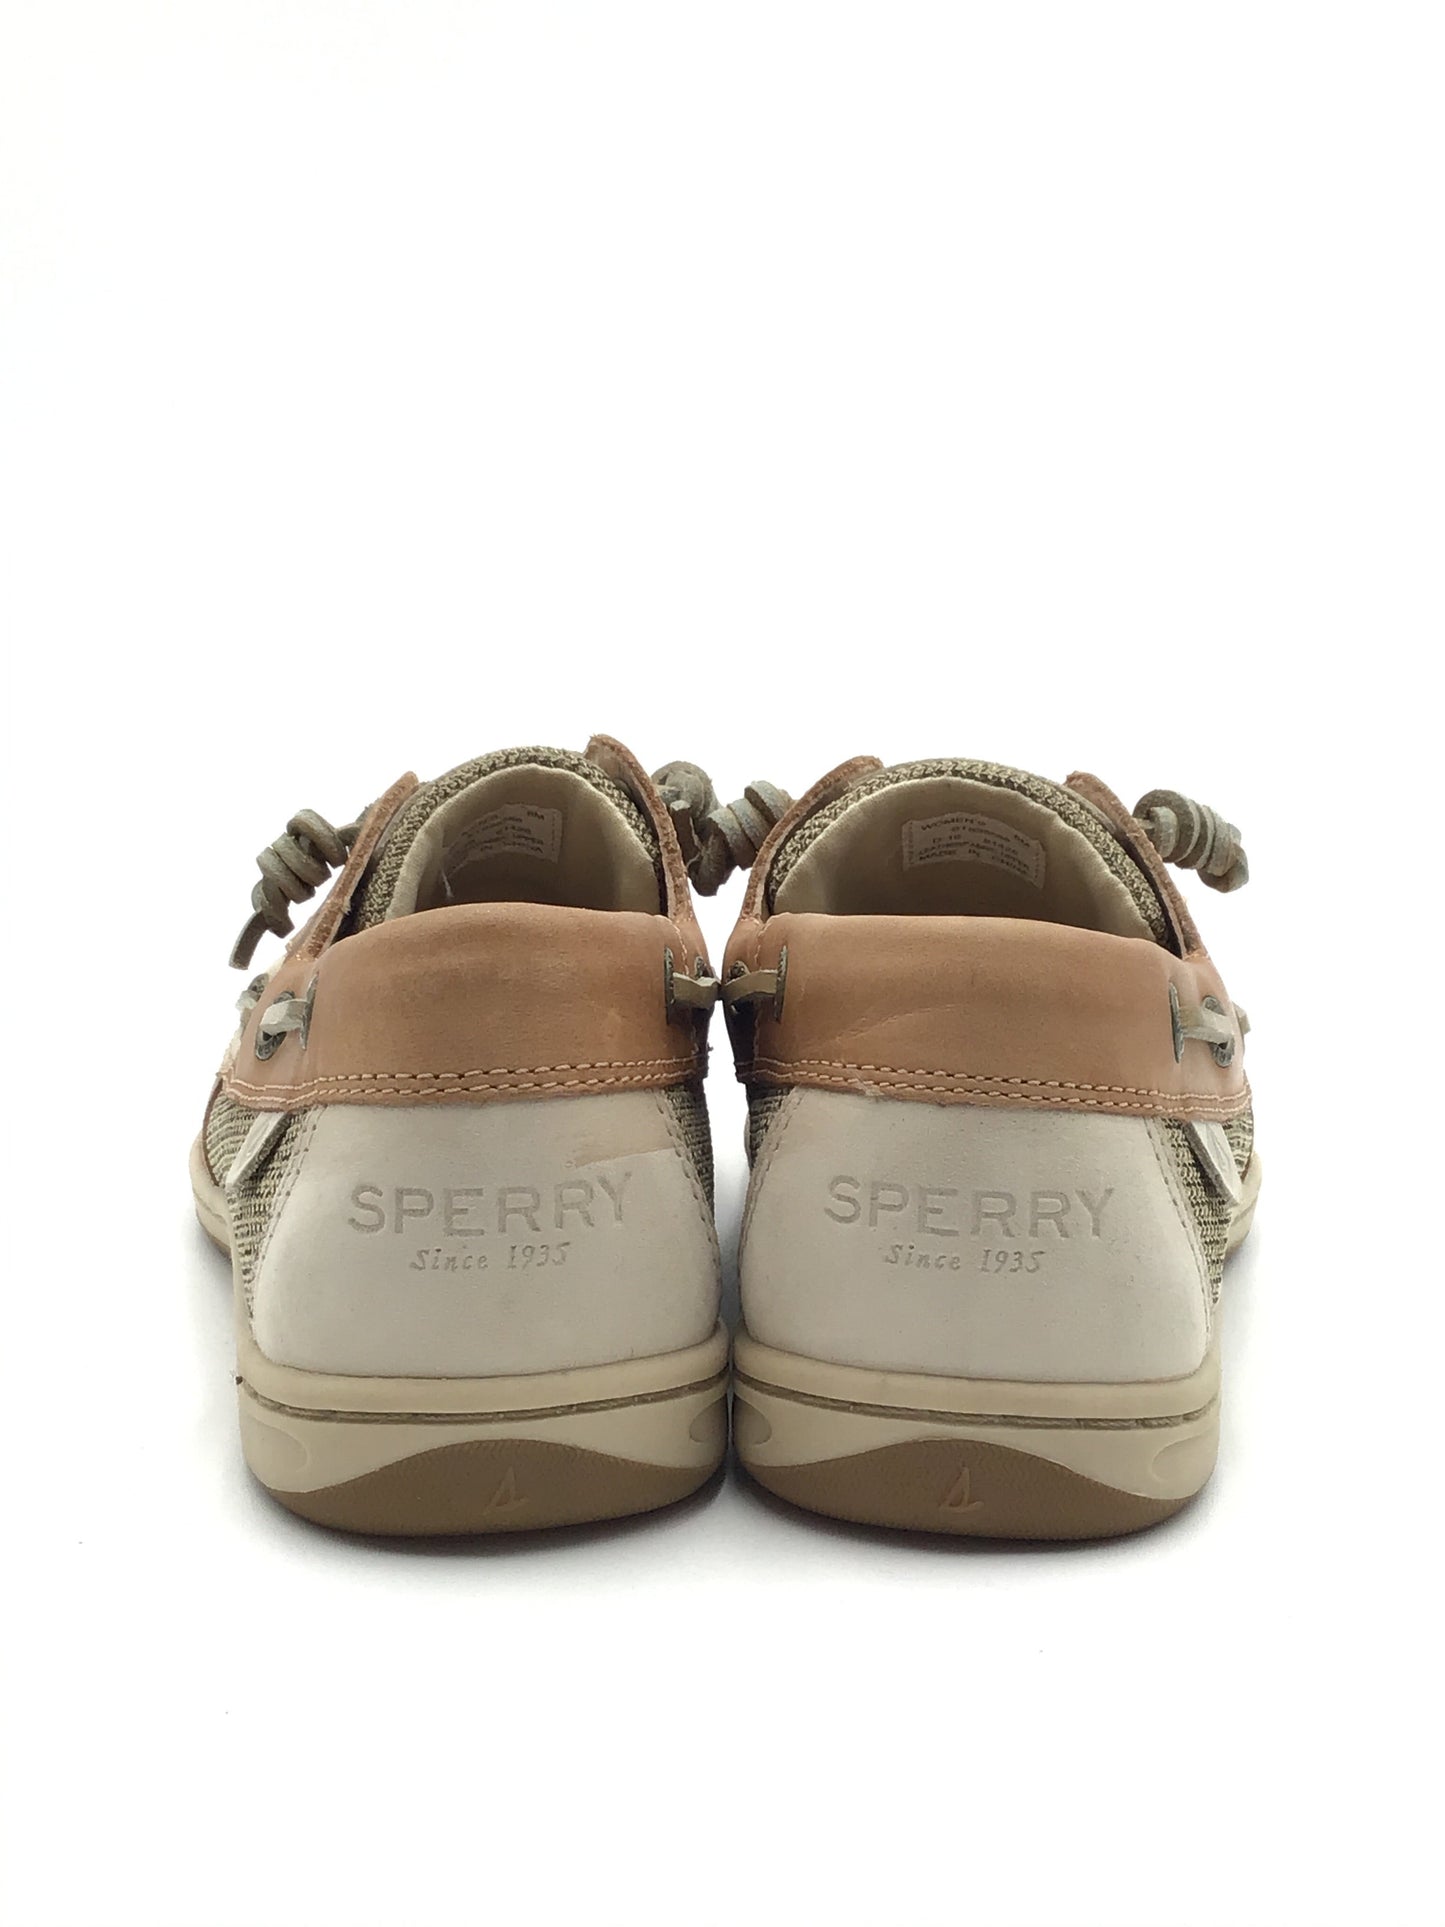 Tan Shoes Flats Sperry, Size 8